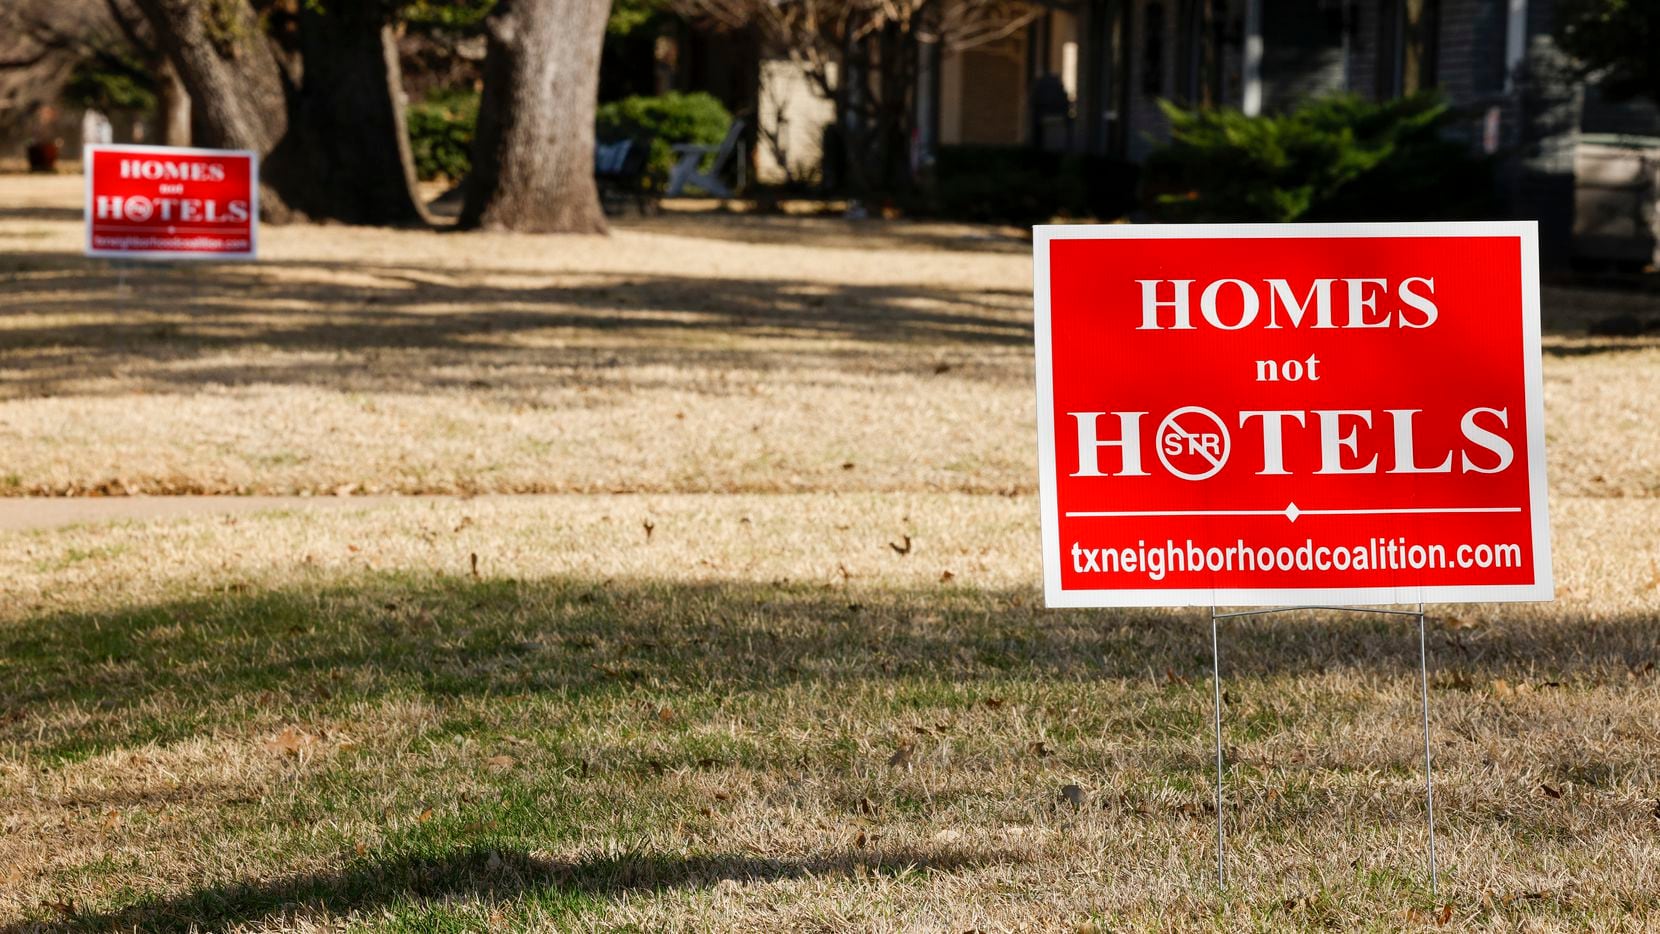 Signs advocating against short-term rentals have been placed in the lawns of homes along...